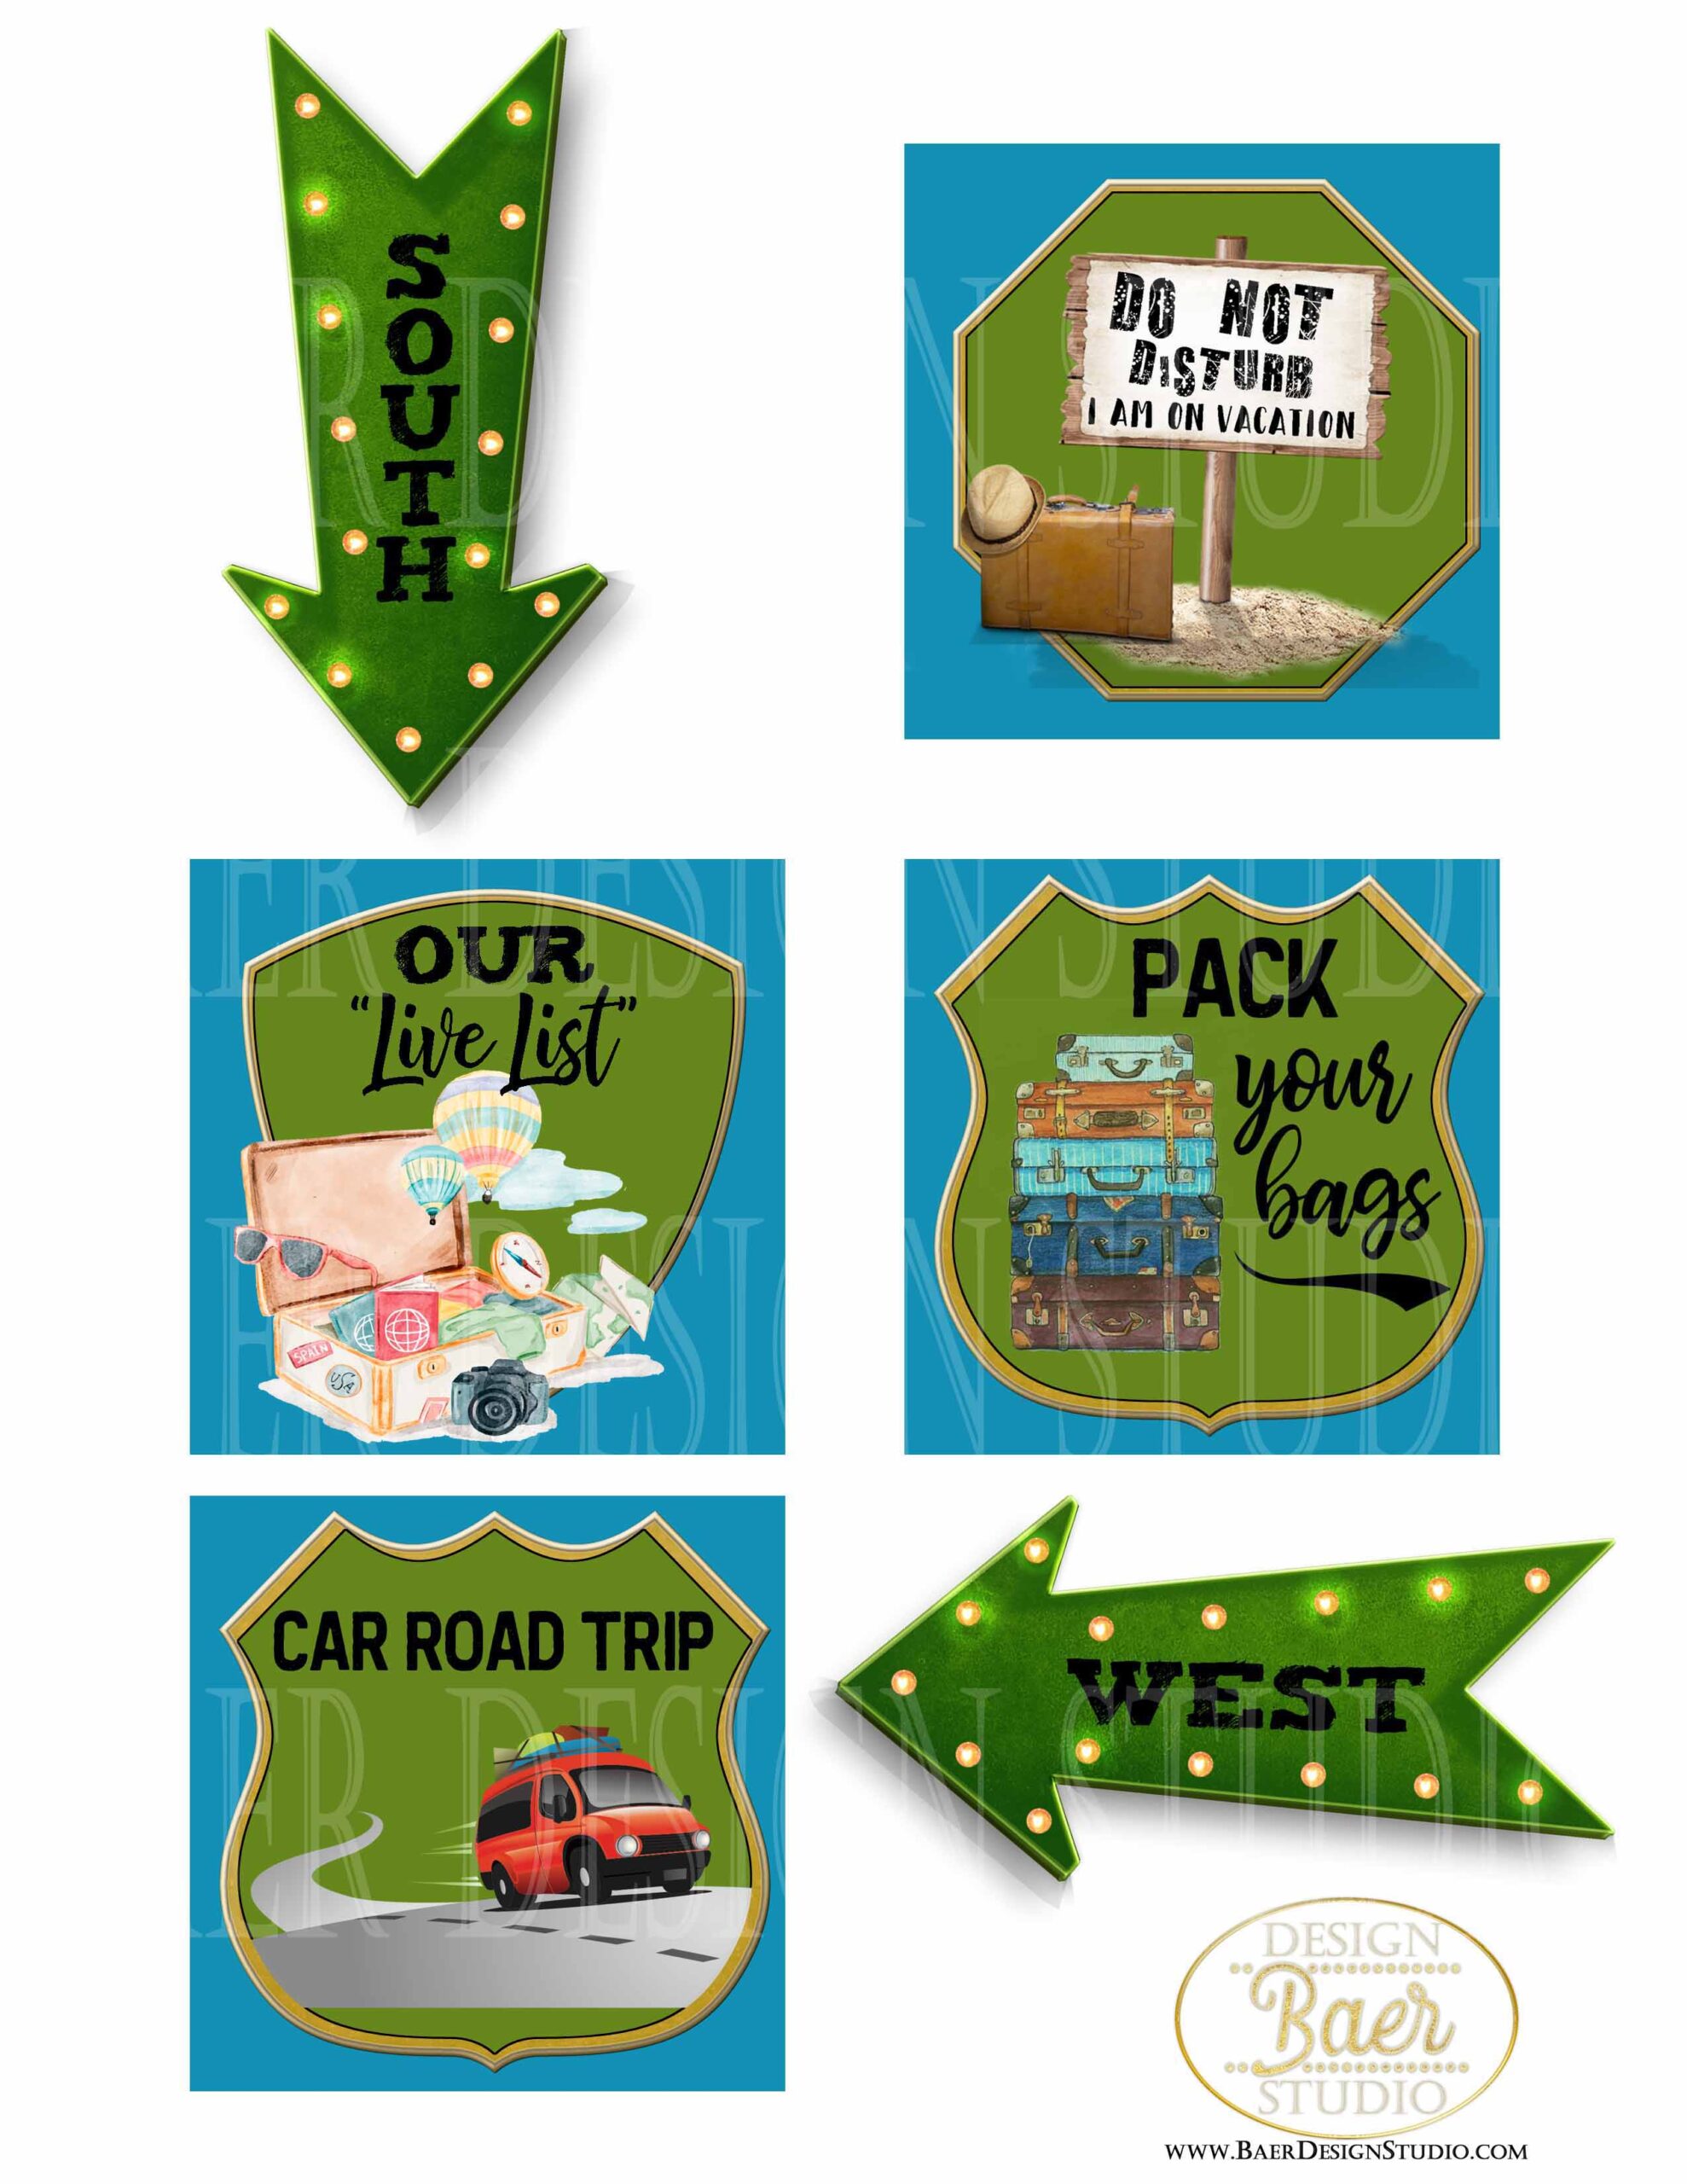 Vacation and Travel Stickers at